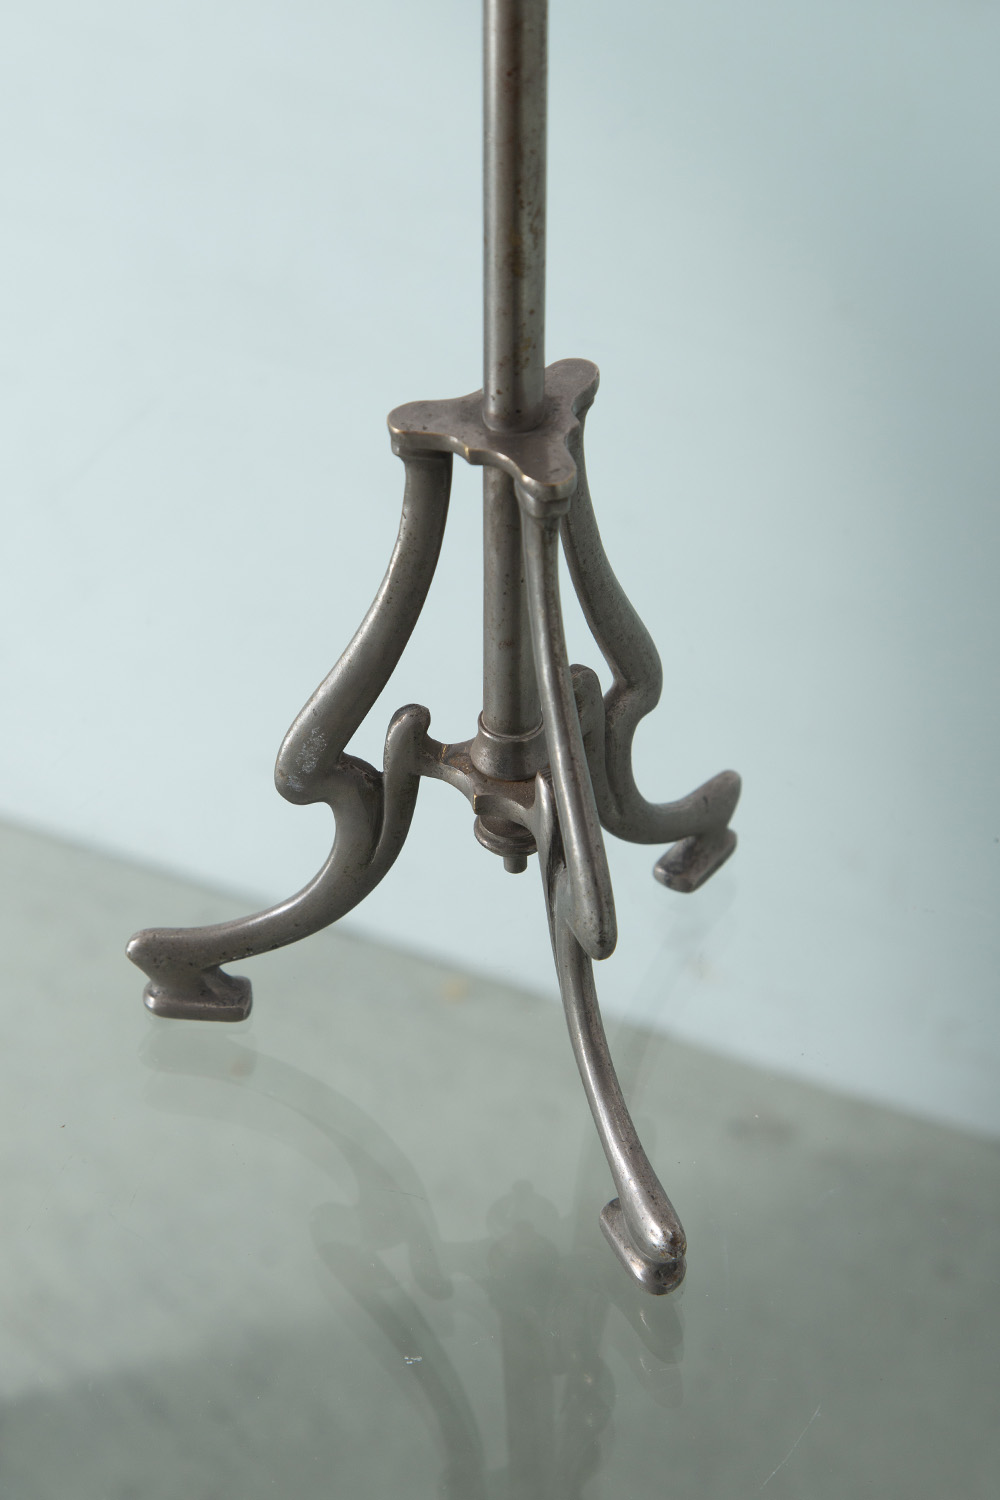 Adjustable Hat Stand in Steel and Wood